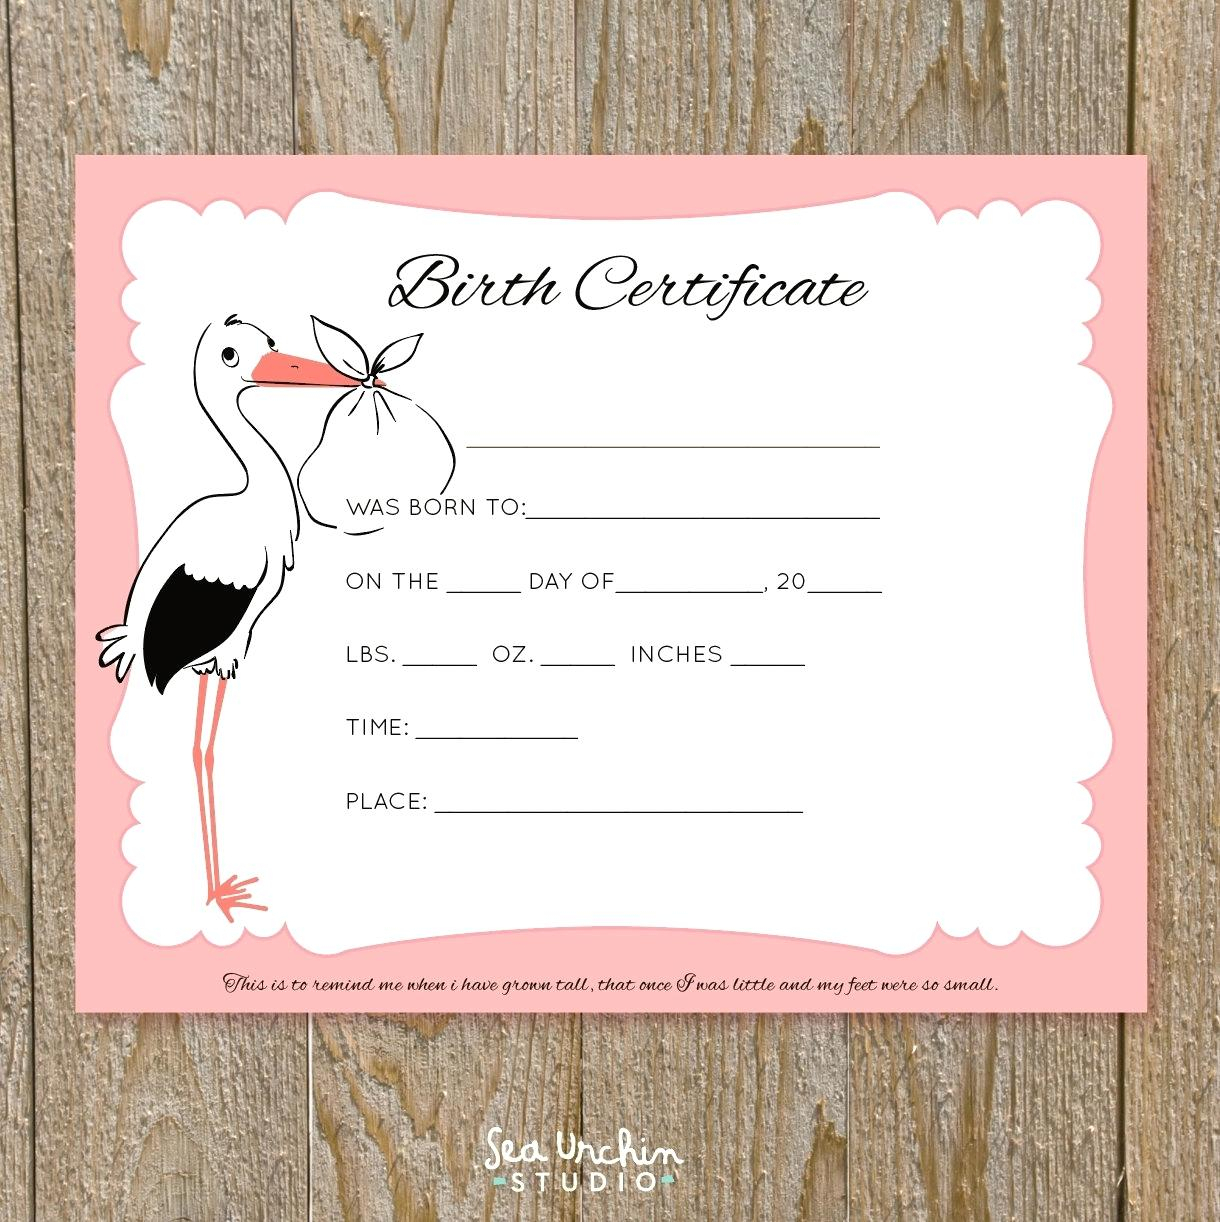 Baby Doll Birth Certificate Template Or With Free Printable Throughout Baby Doll Birth Certificate Template